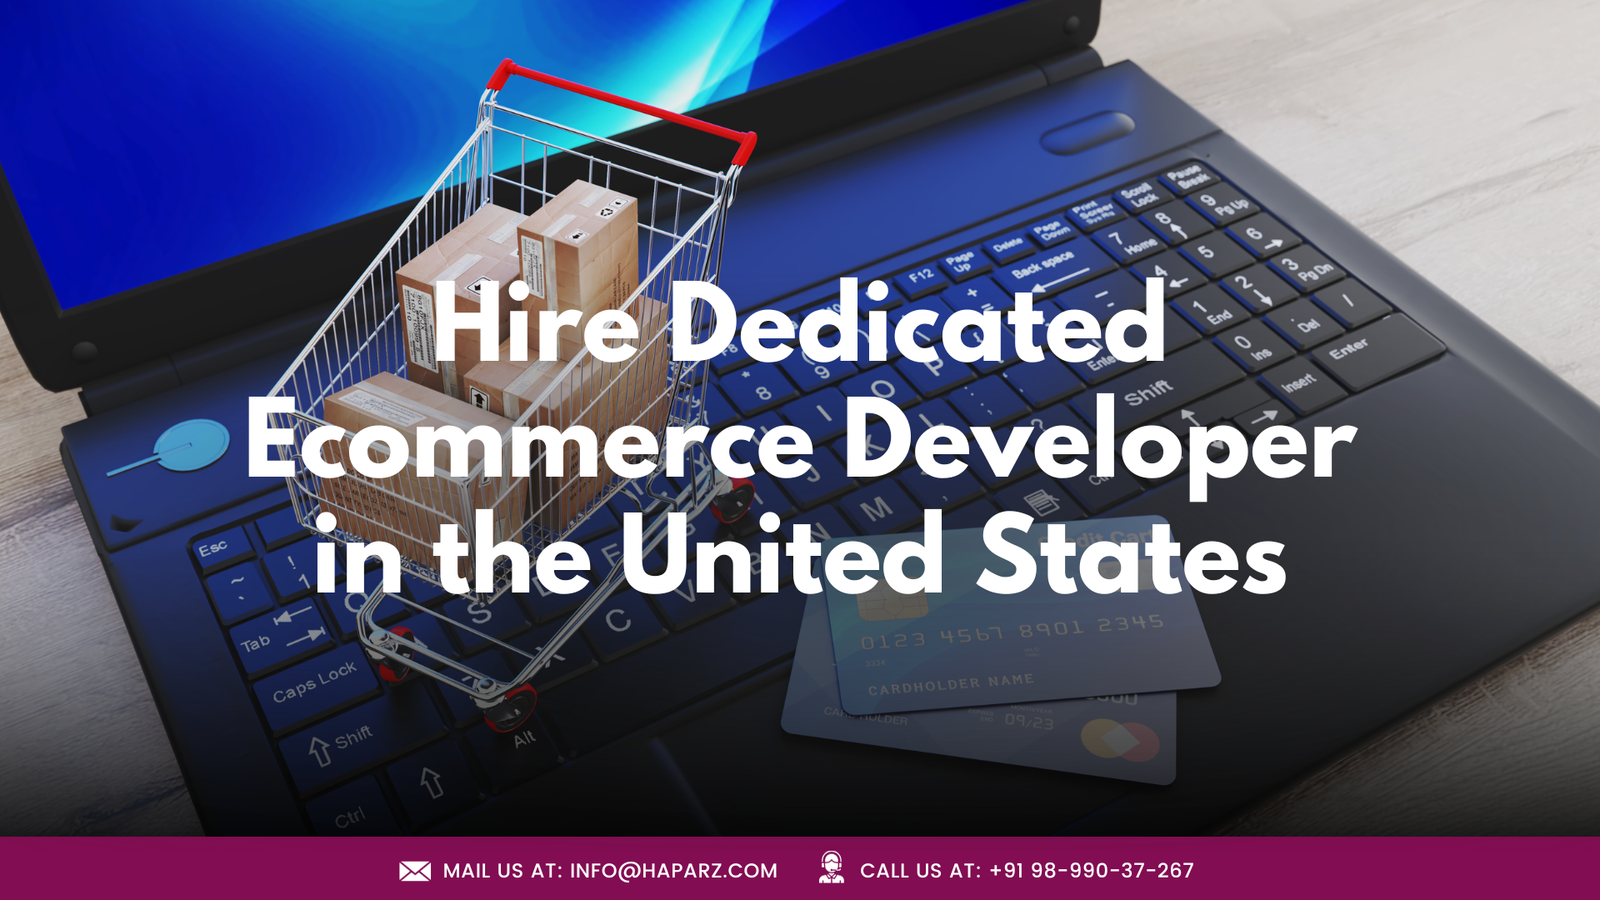 Hire Dedicated Ecommerce Developer in the United States